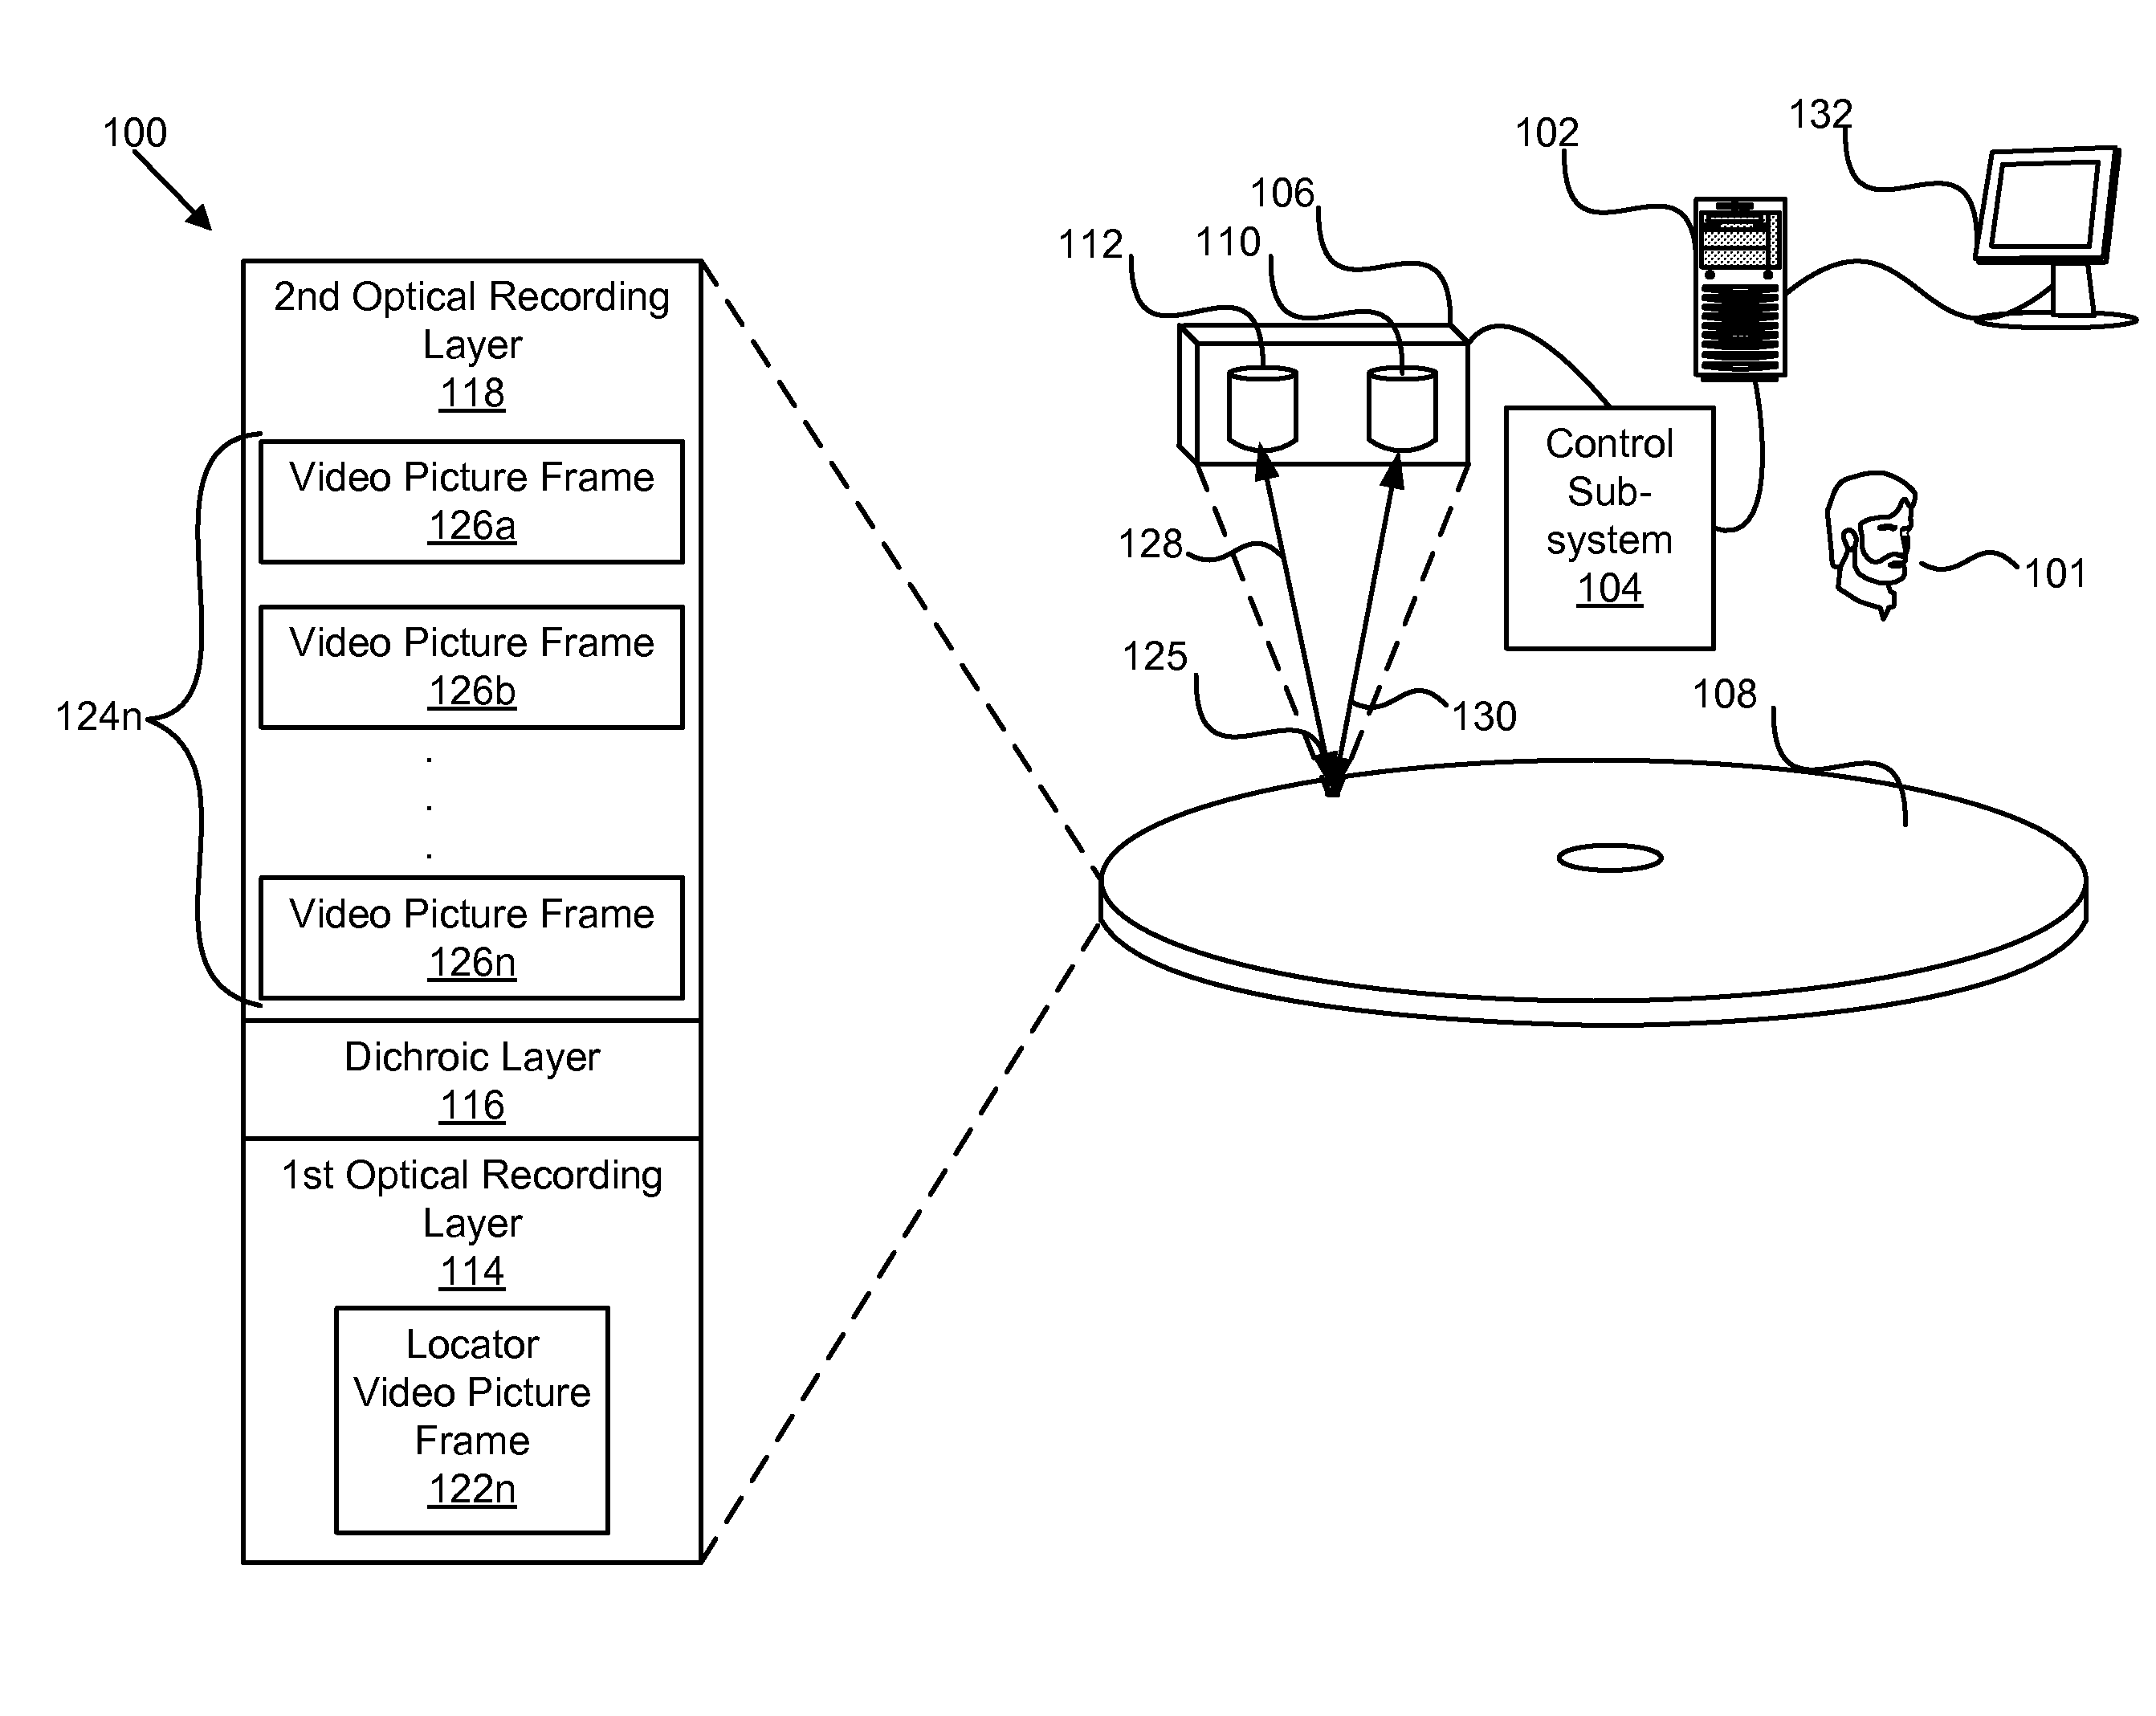 Apparatus, system, and method for locating and fast-searching units of digital information in volume, optical-storage disks